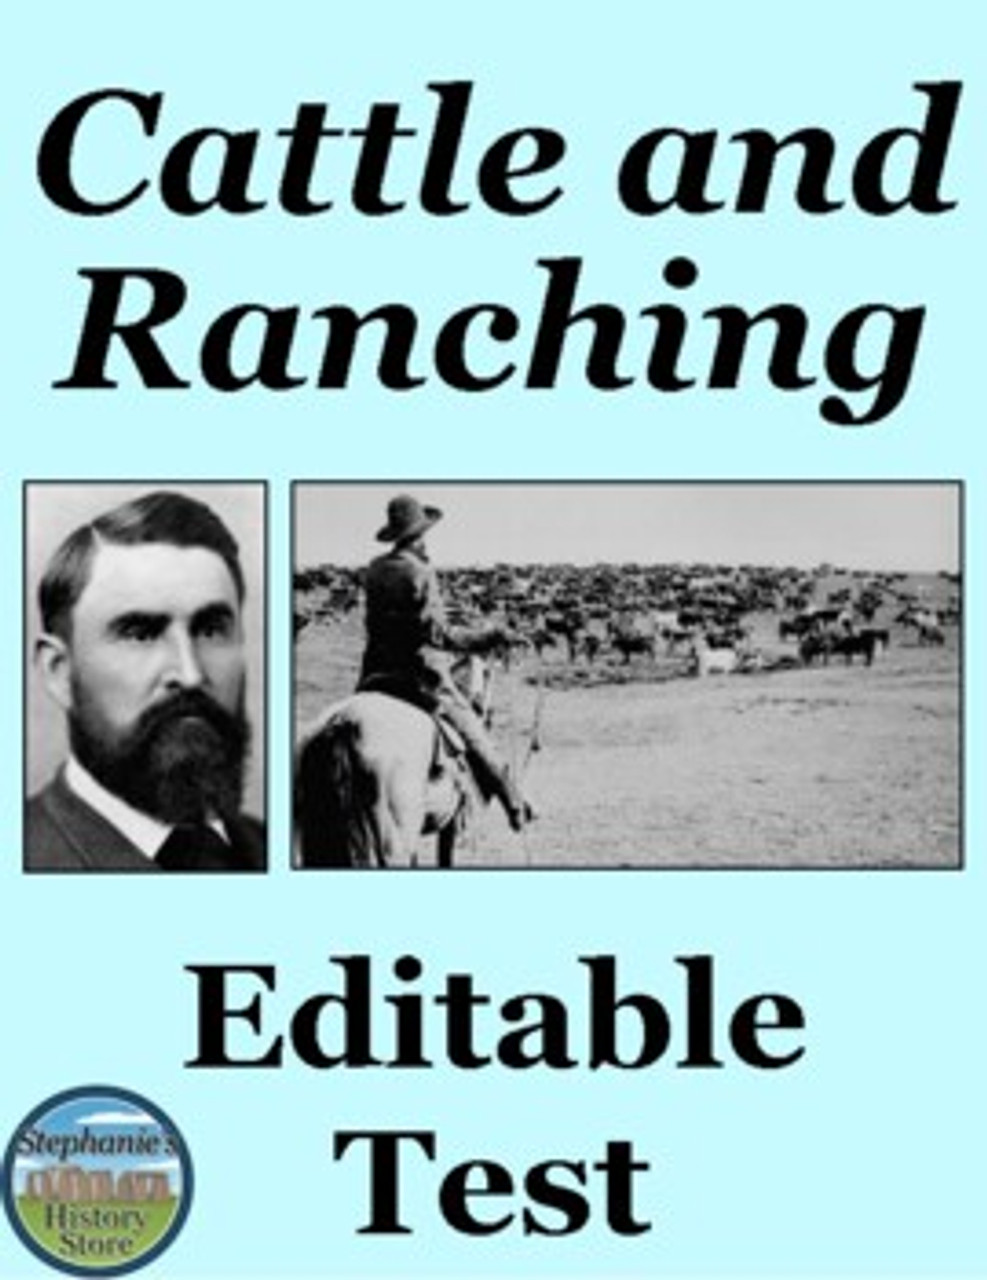 Texas Cattle Ranching, Cowboys, and Cotton Test